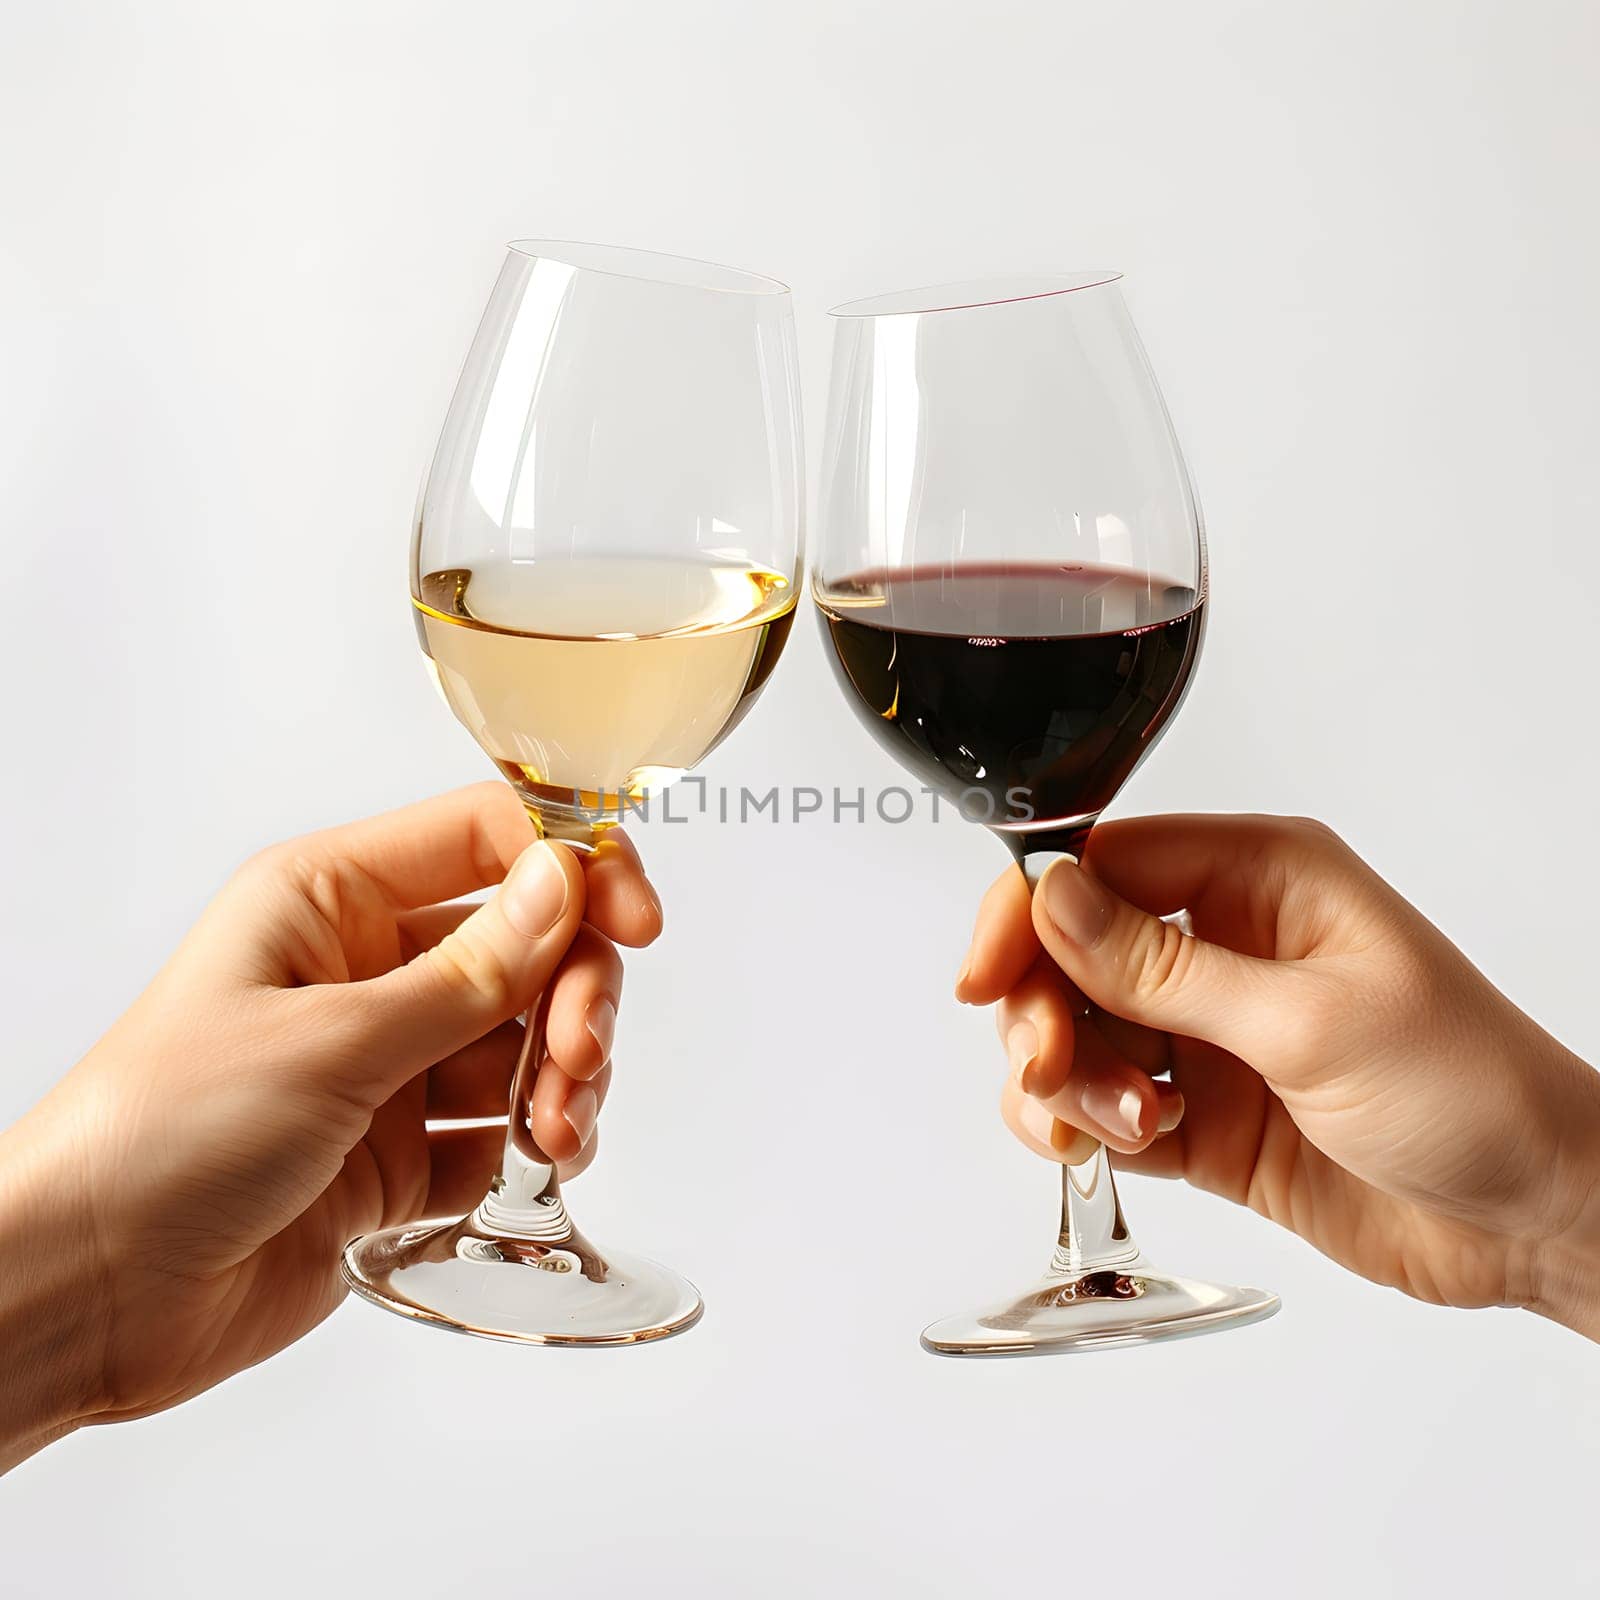 Two people making a gesture with stemware, toasting with wine glasses by Nadtochiy